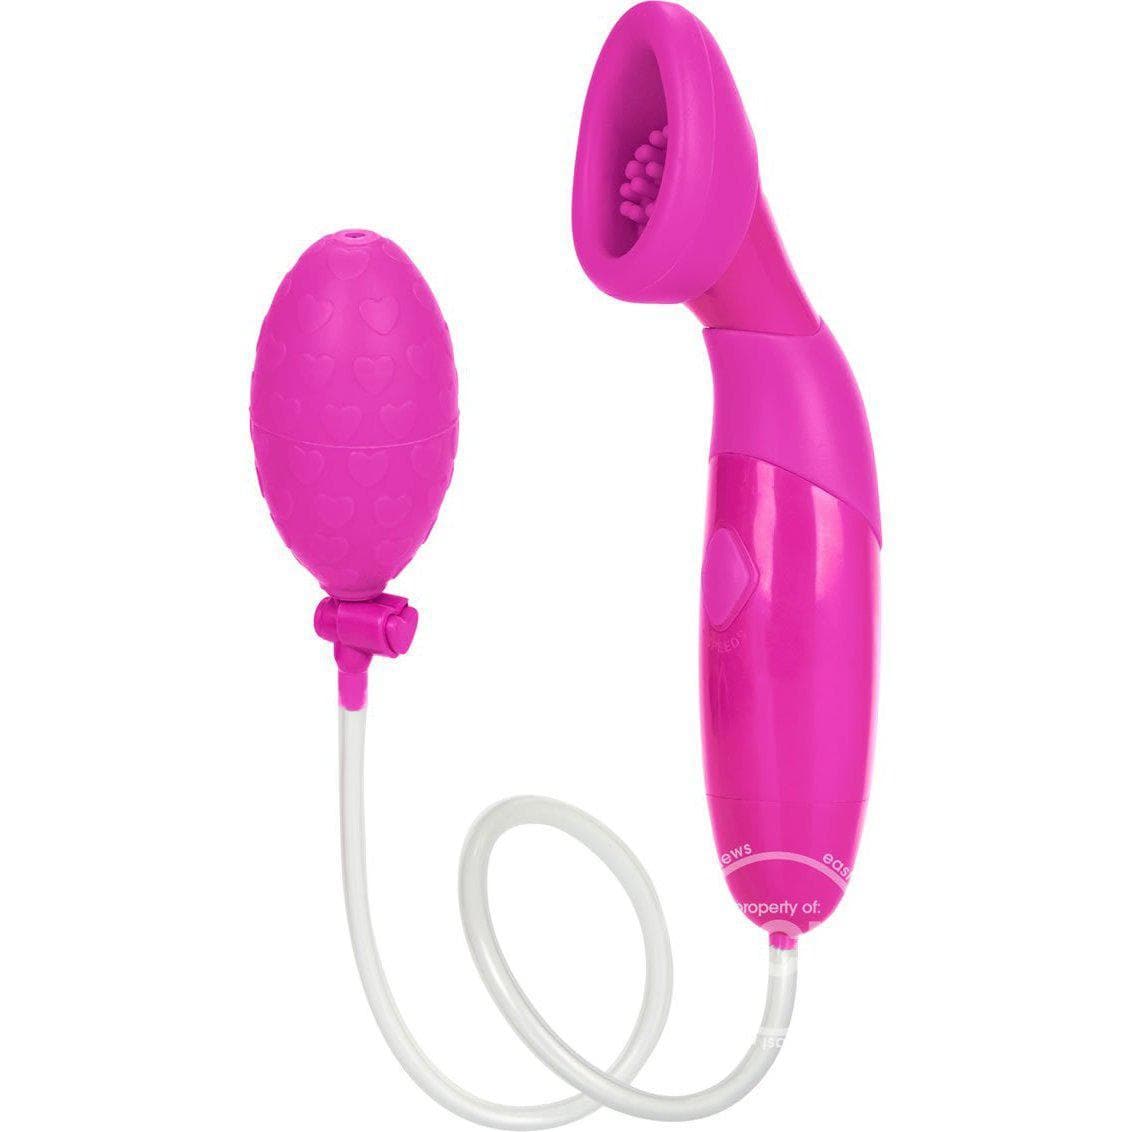 Intimate Pump Silicone Multispeed Vibrating Clitoral Pump with Tantalizing Ticklers - Romantic Blessings